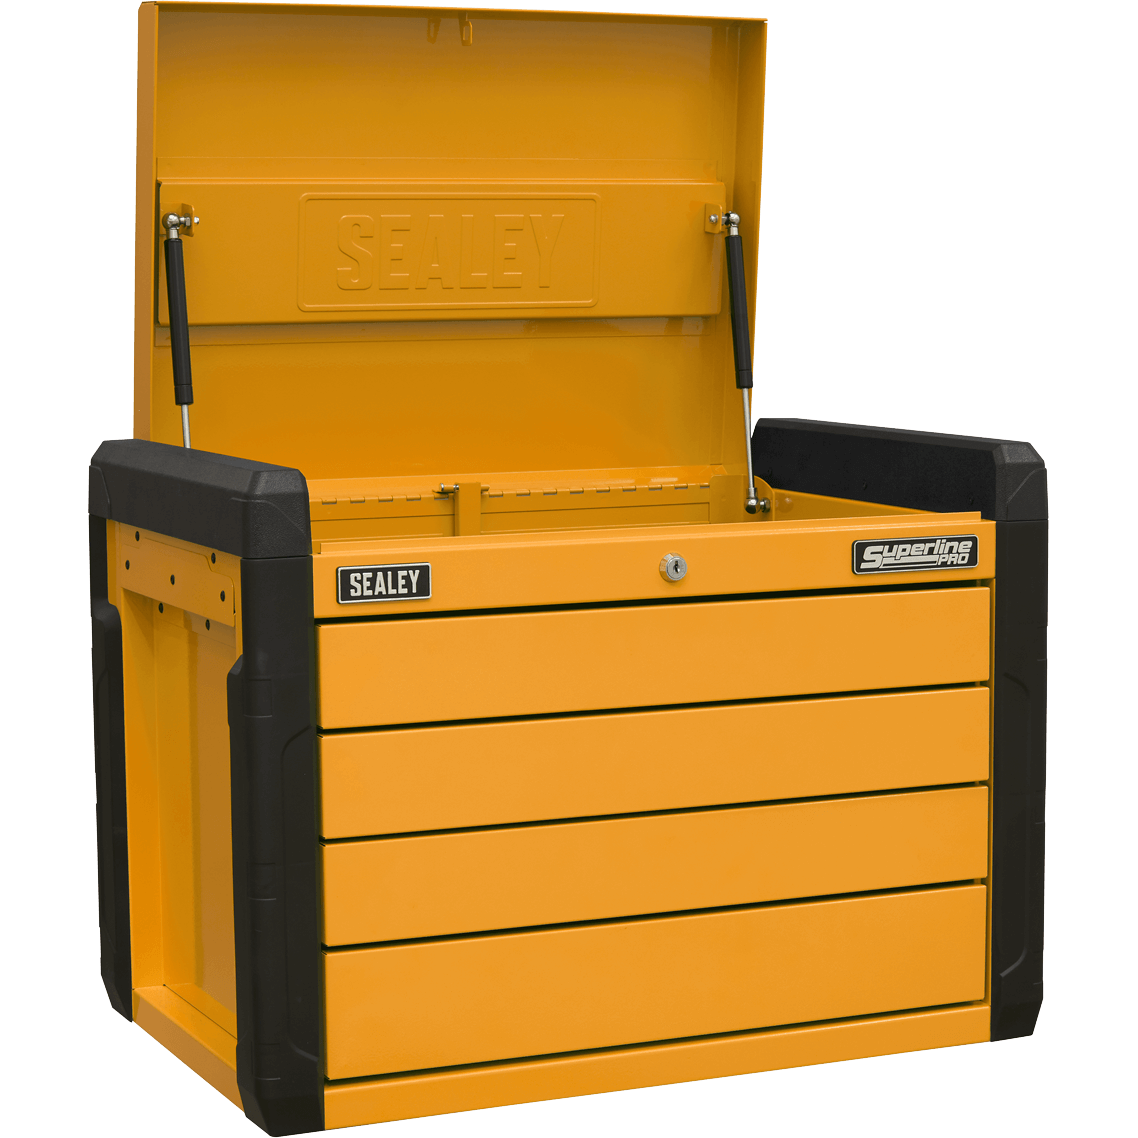 Sealey Superline Pro 4 Drawer Push To Open Tool Chest Orange